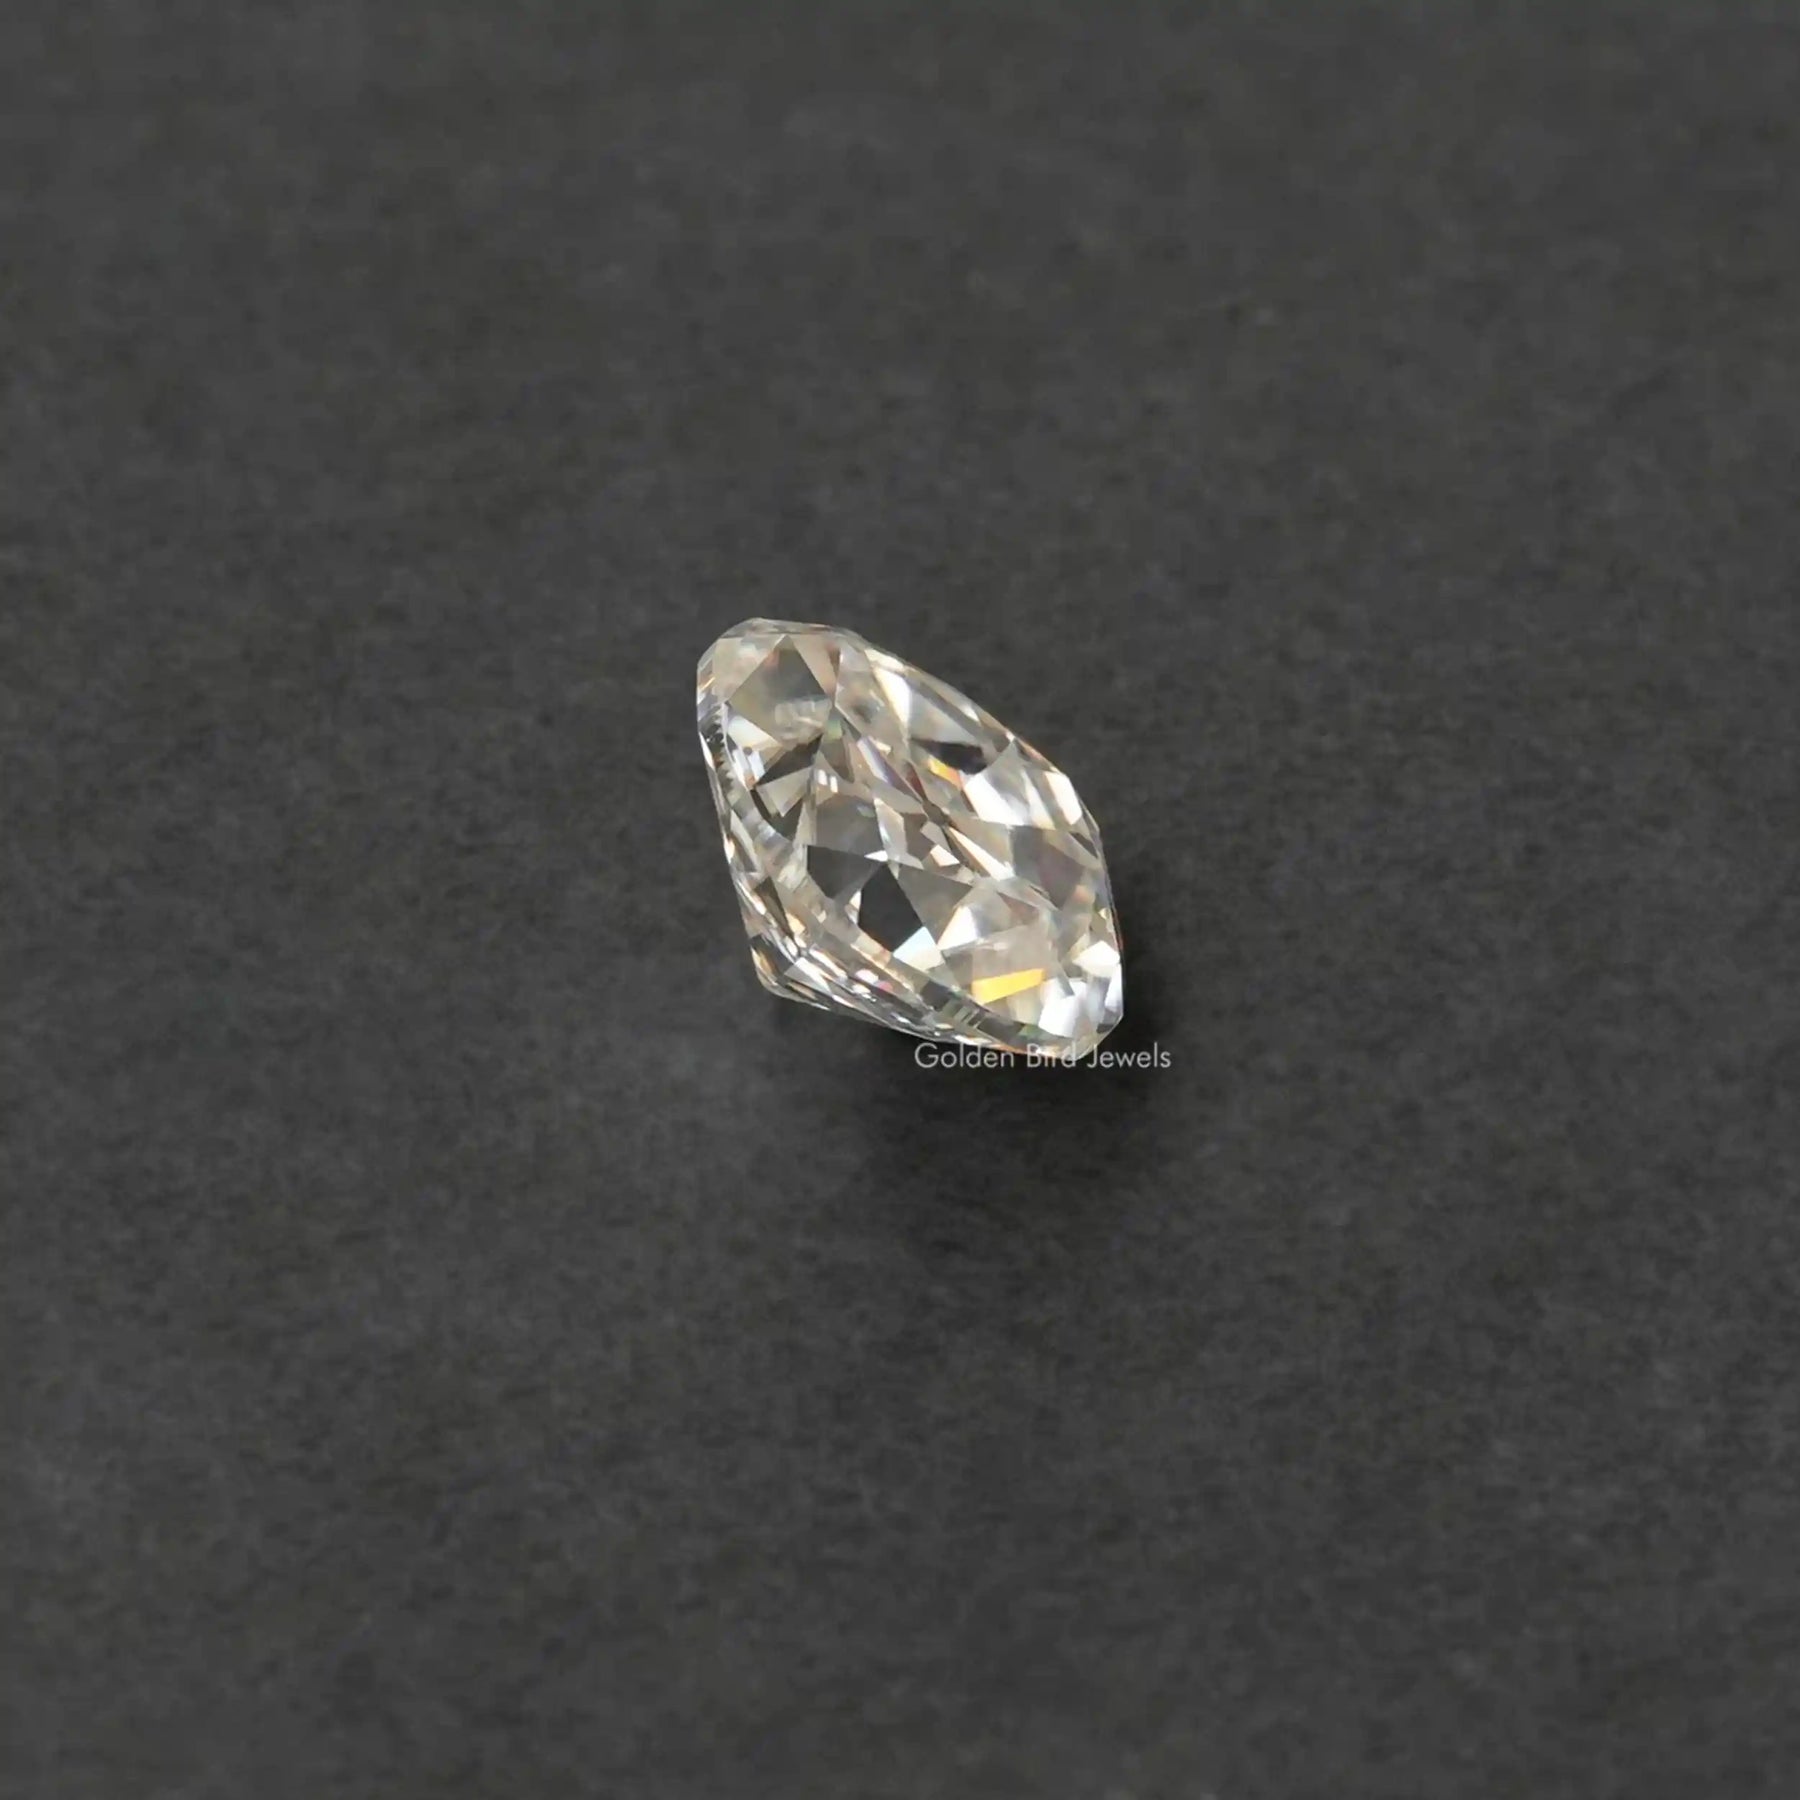 [Side view of cushion cut loose moissanite]-[Golden Bird Jewels]